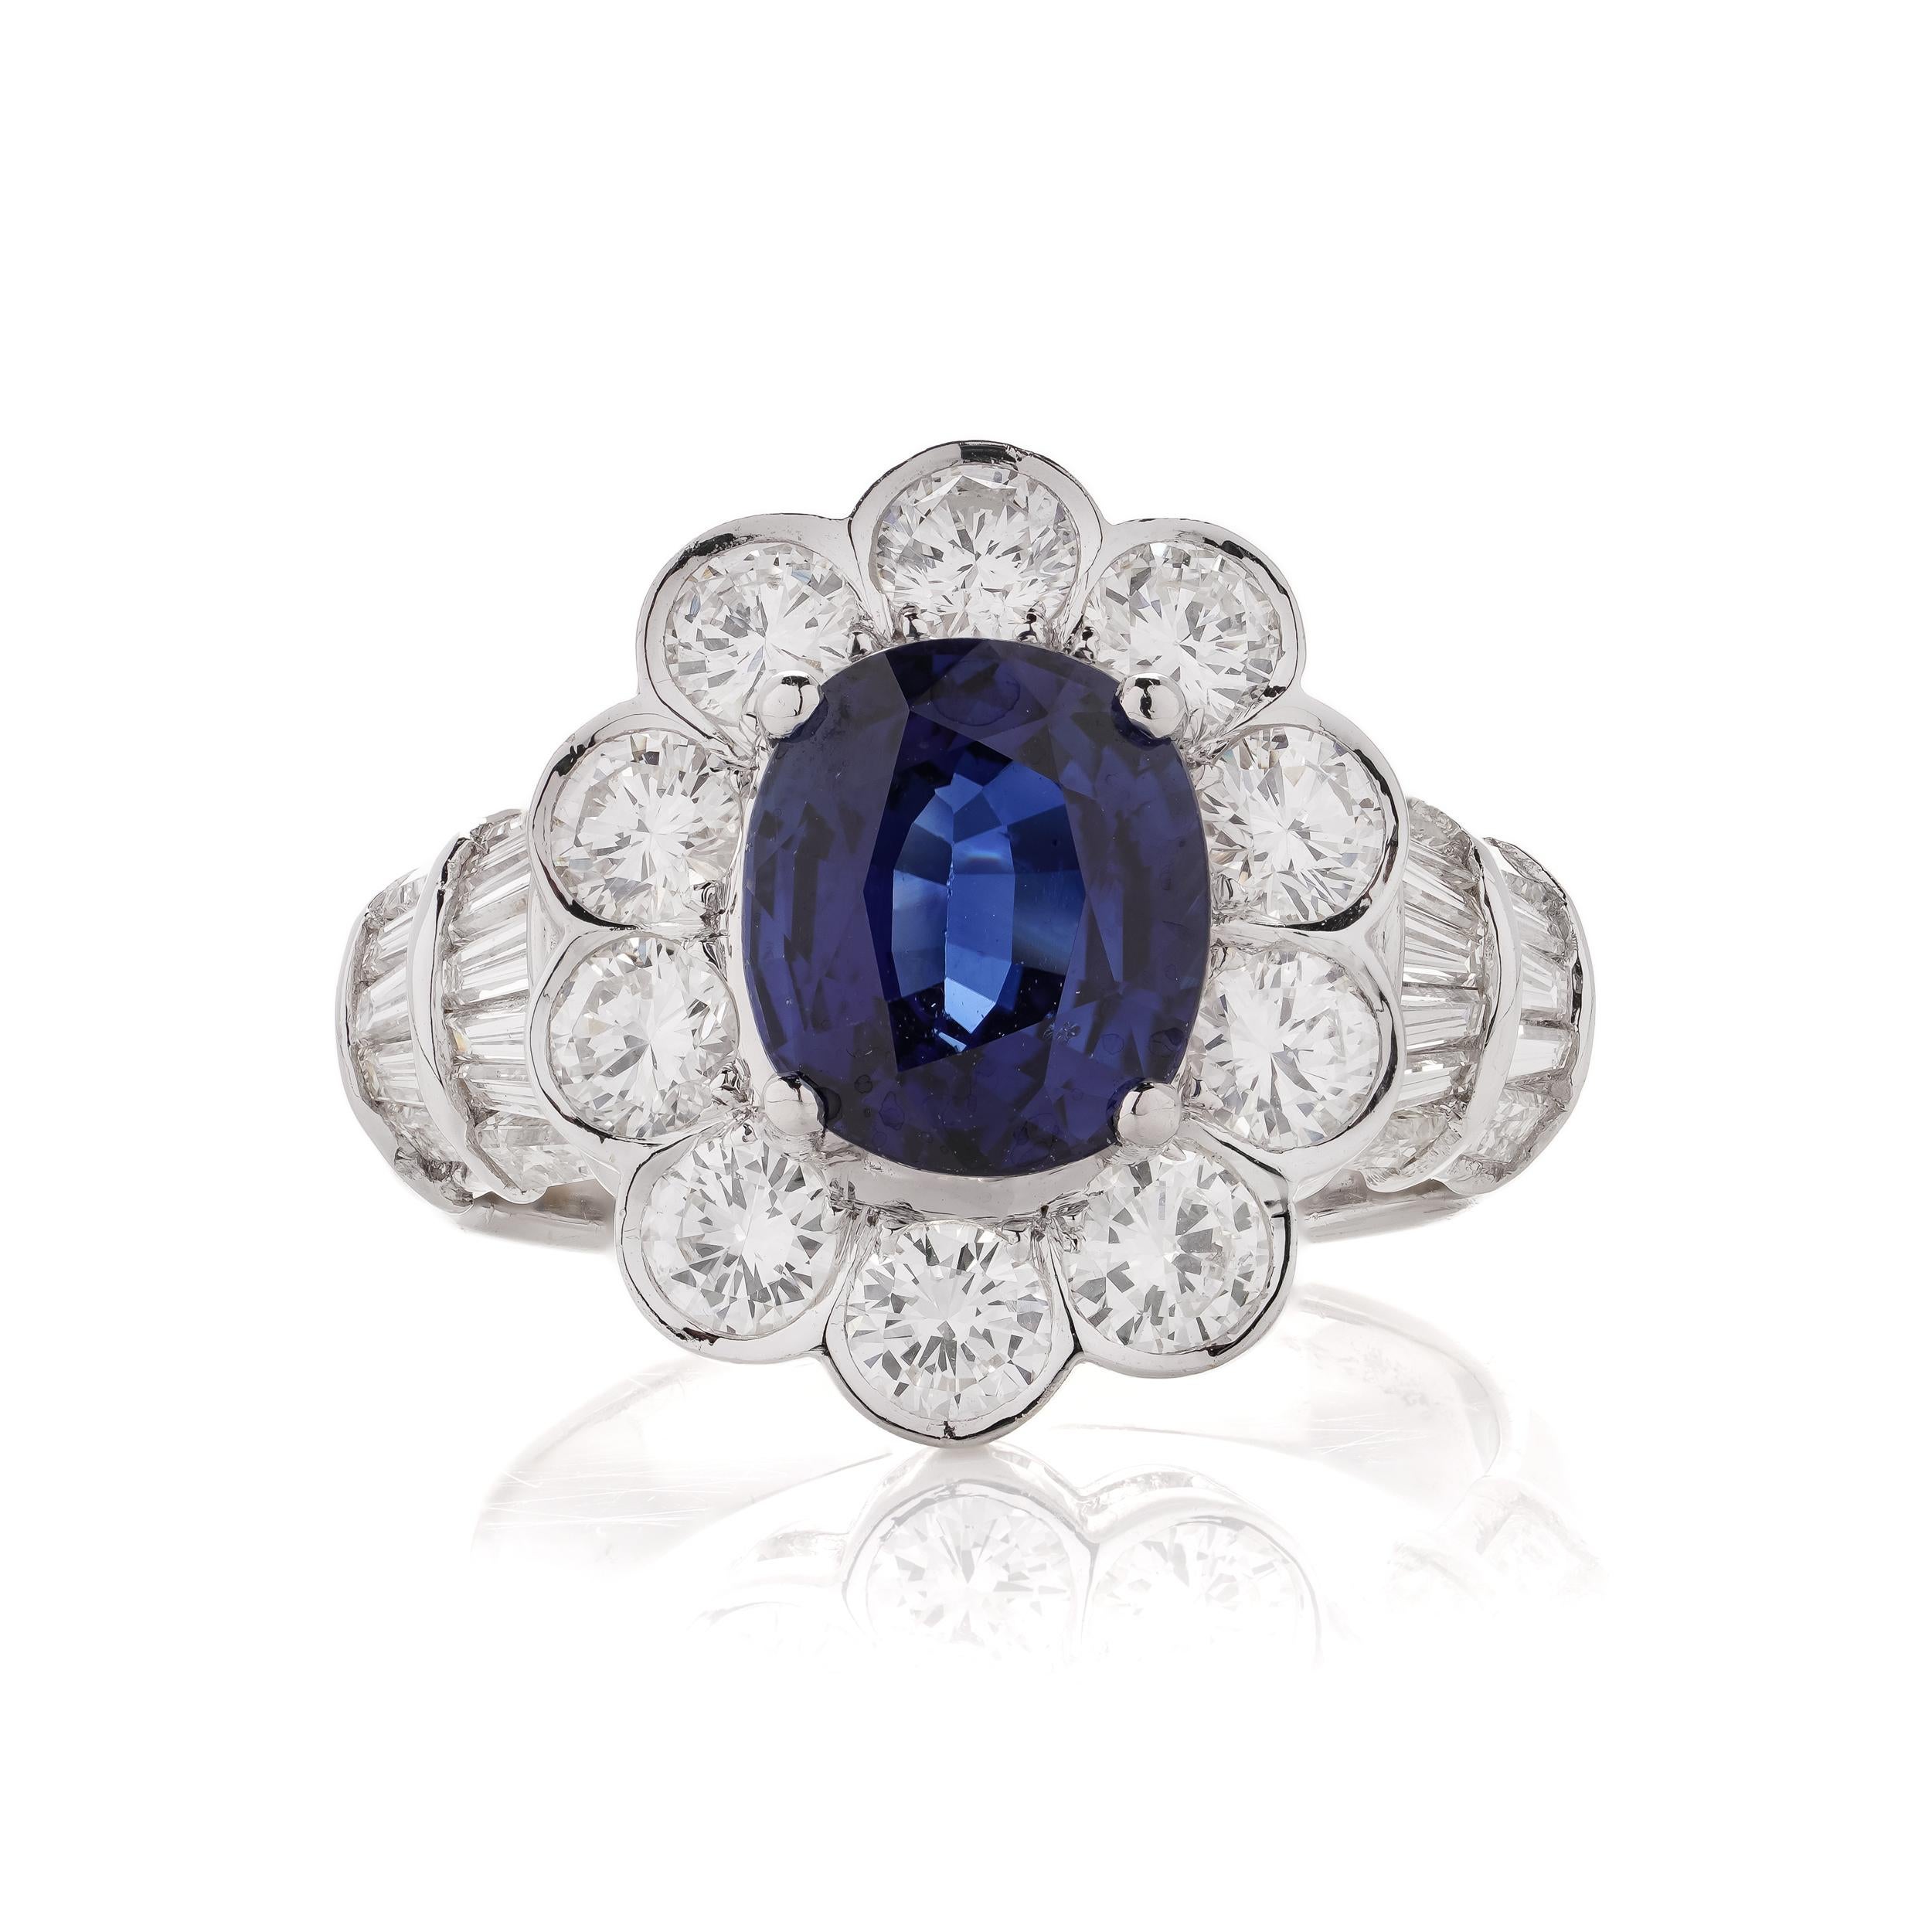 18kt. white gold 3.30 carat Oval Blue Sapphire Cluster ladies ring, surrounded by round 1.80 carats of brilliant diamonds accented with 0.70 carats of  baguette and tapered baguette diamonds. 

Hallmarked for 750 ( 18kt. gold standard )

* Please